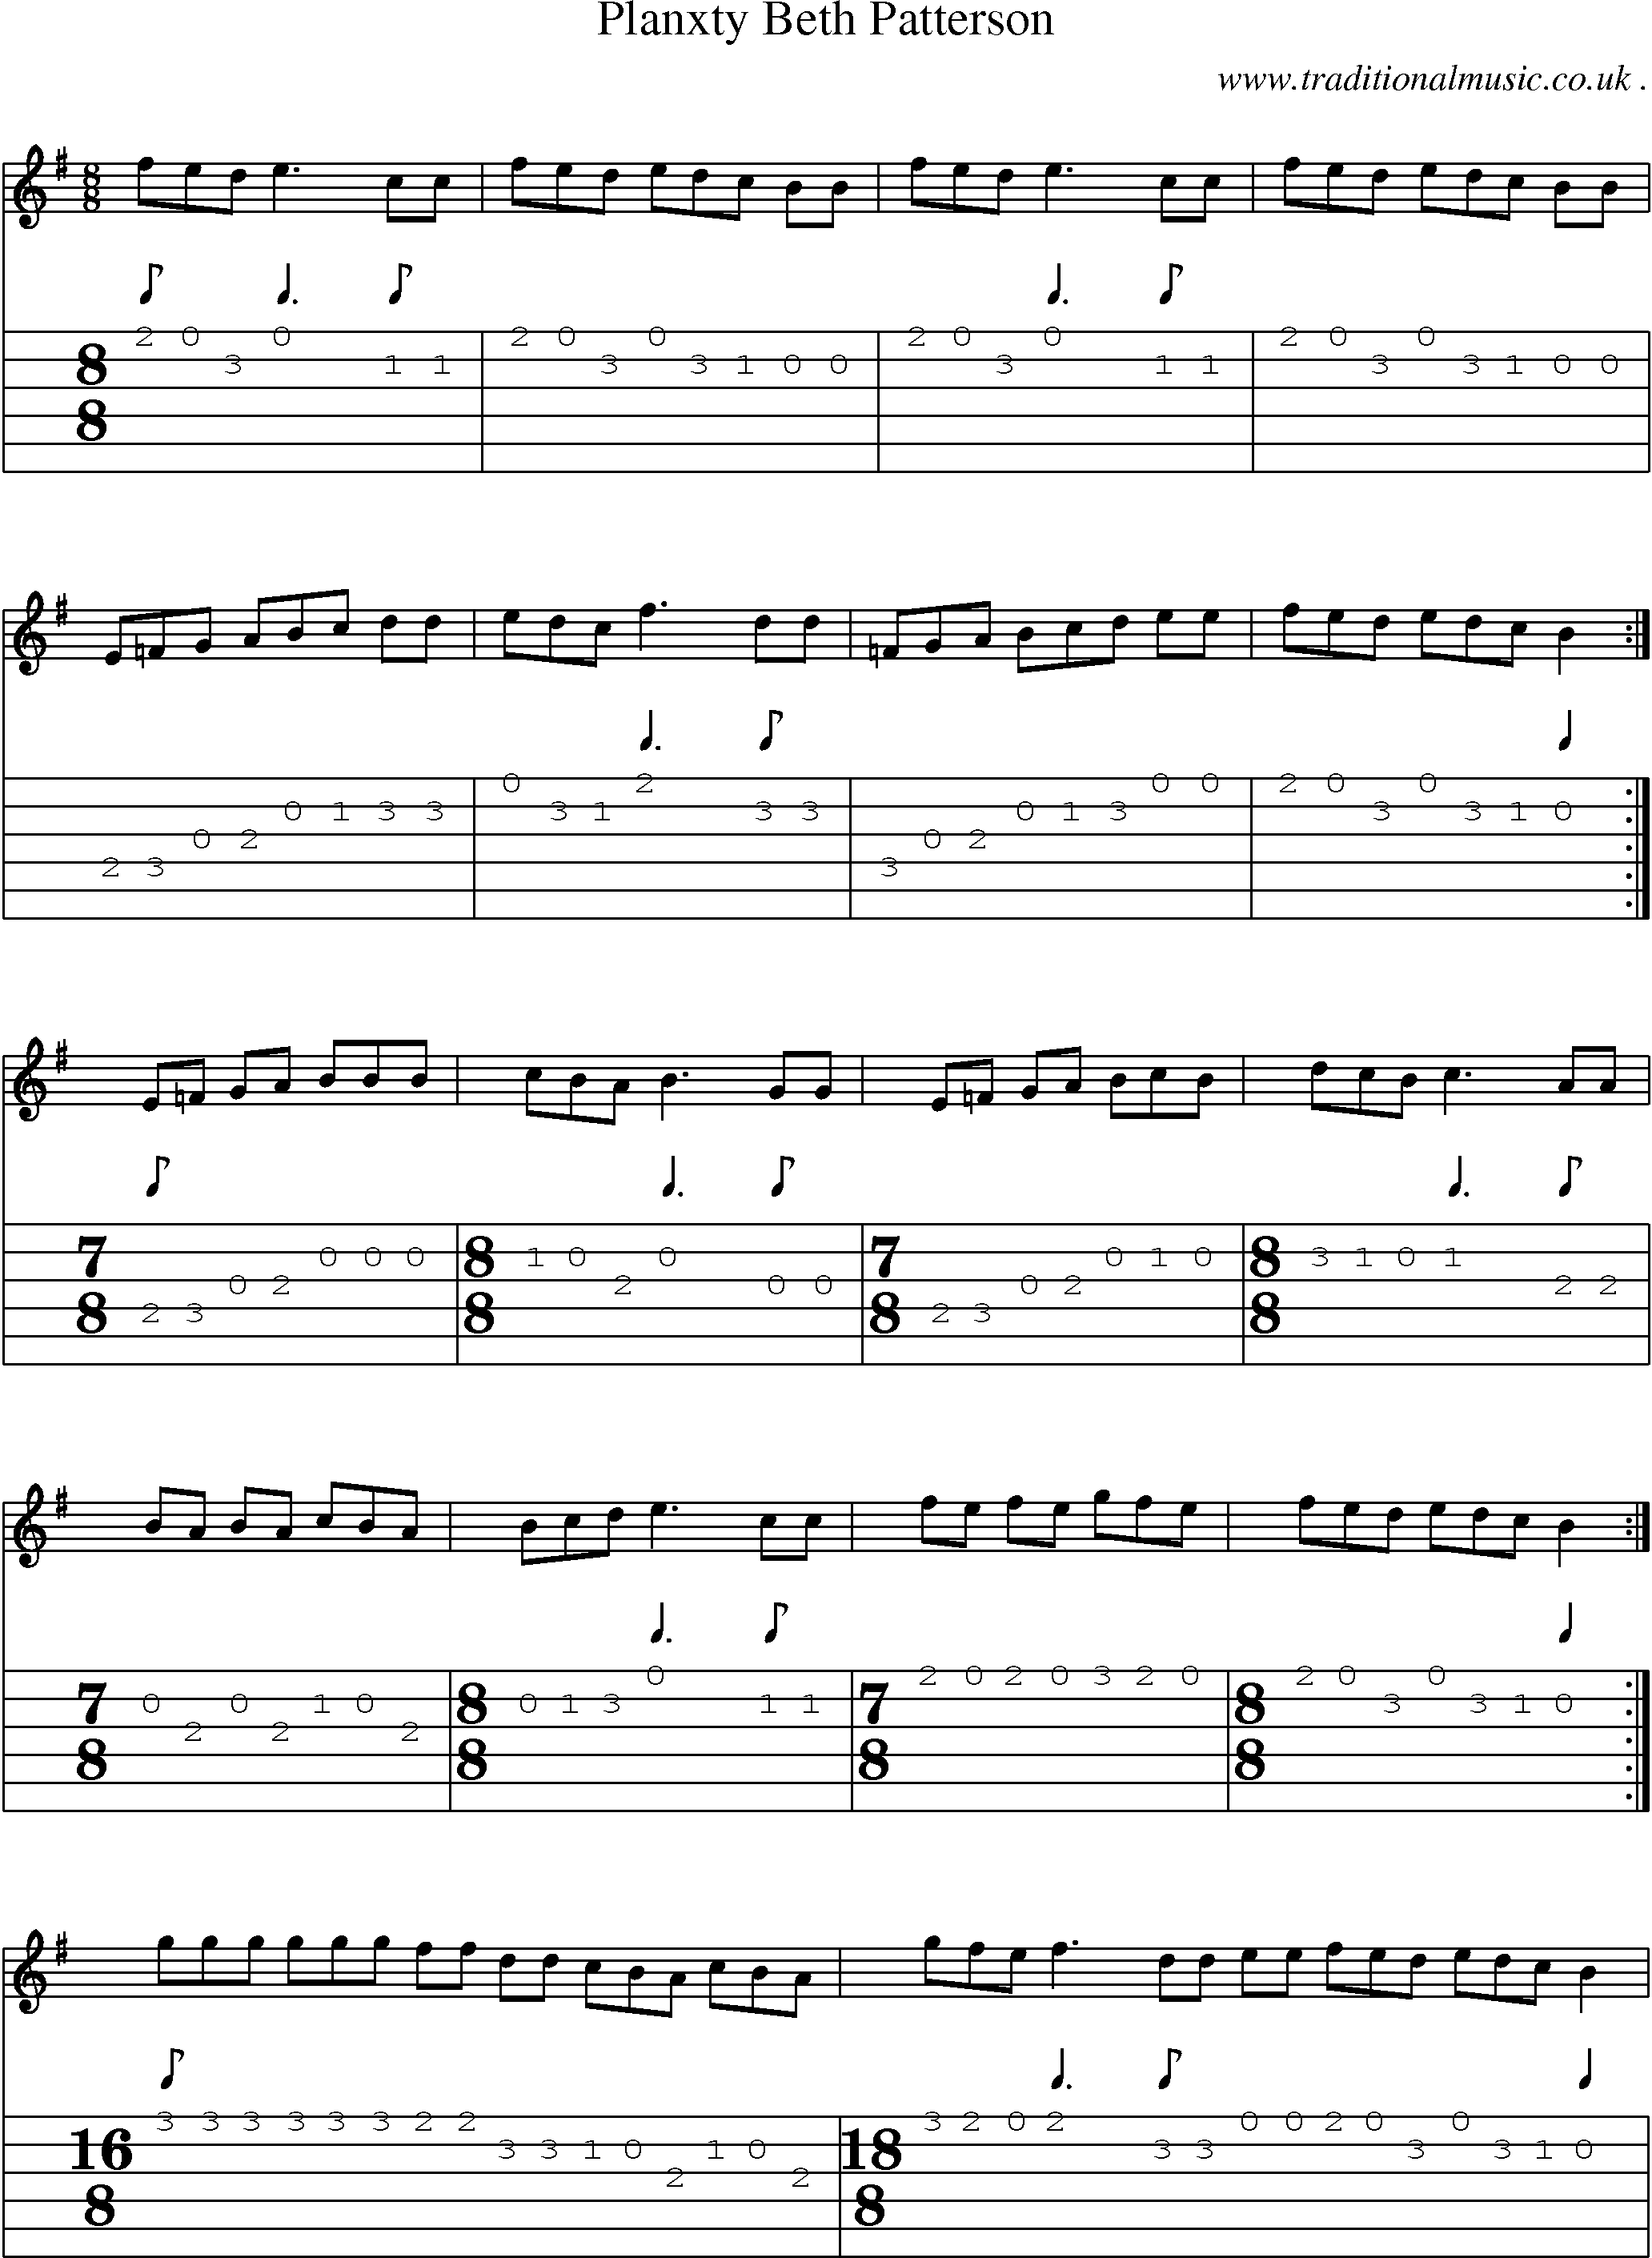 Sheet-Music and Guitar Tabs for Planxty Beth Patterson